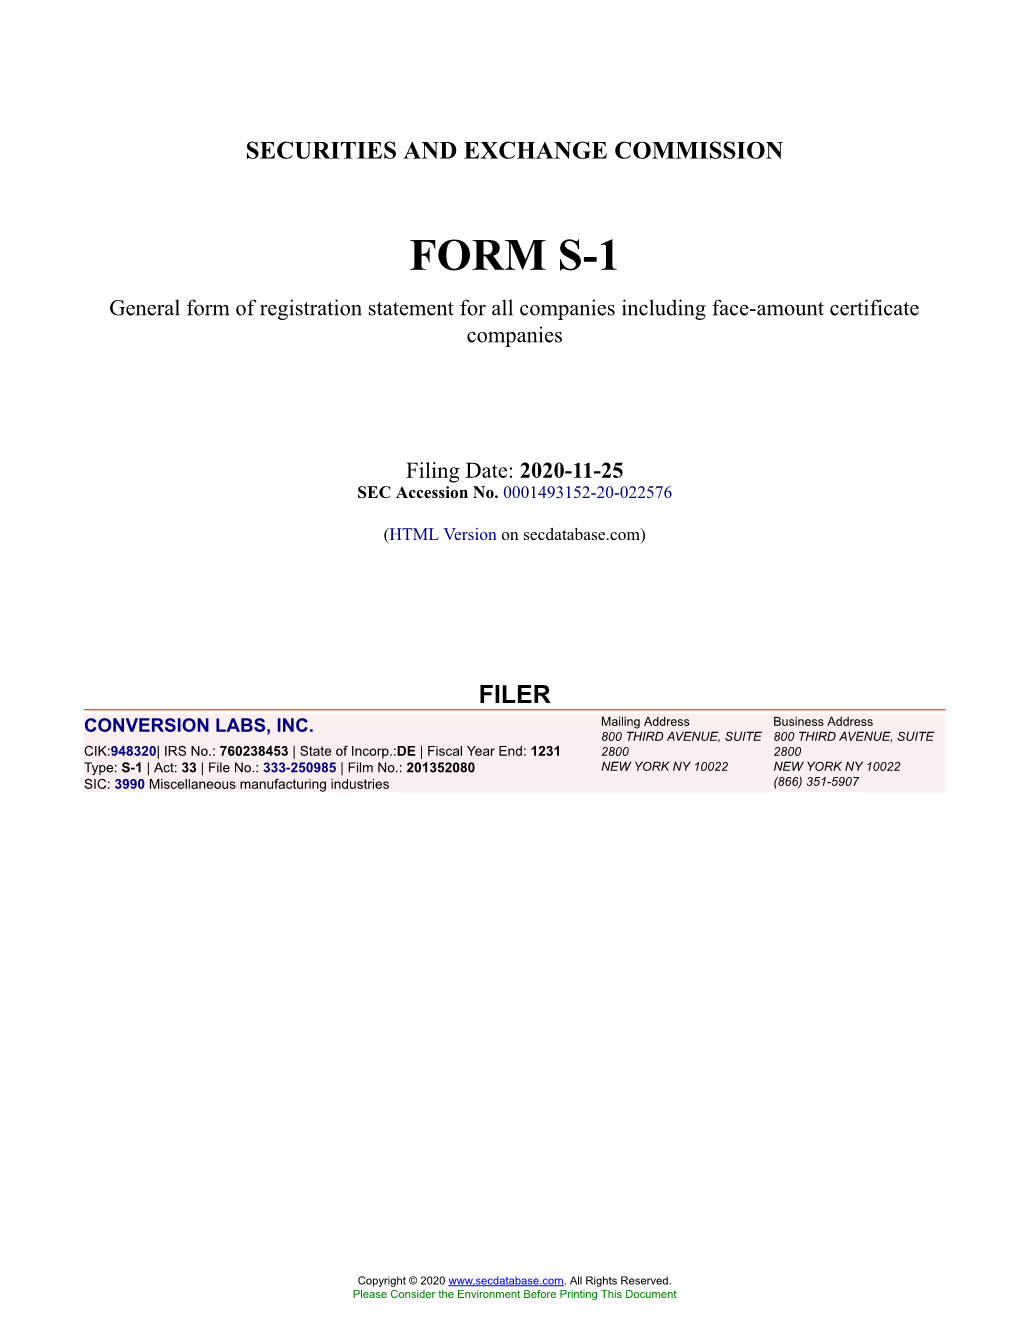 CONVERSION LABS, INC. Form S-1 Filed 2020-11-25